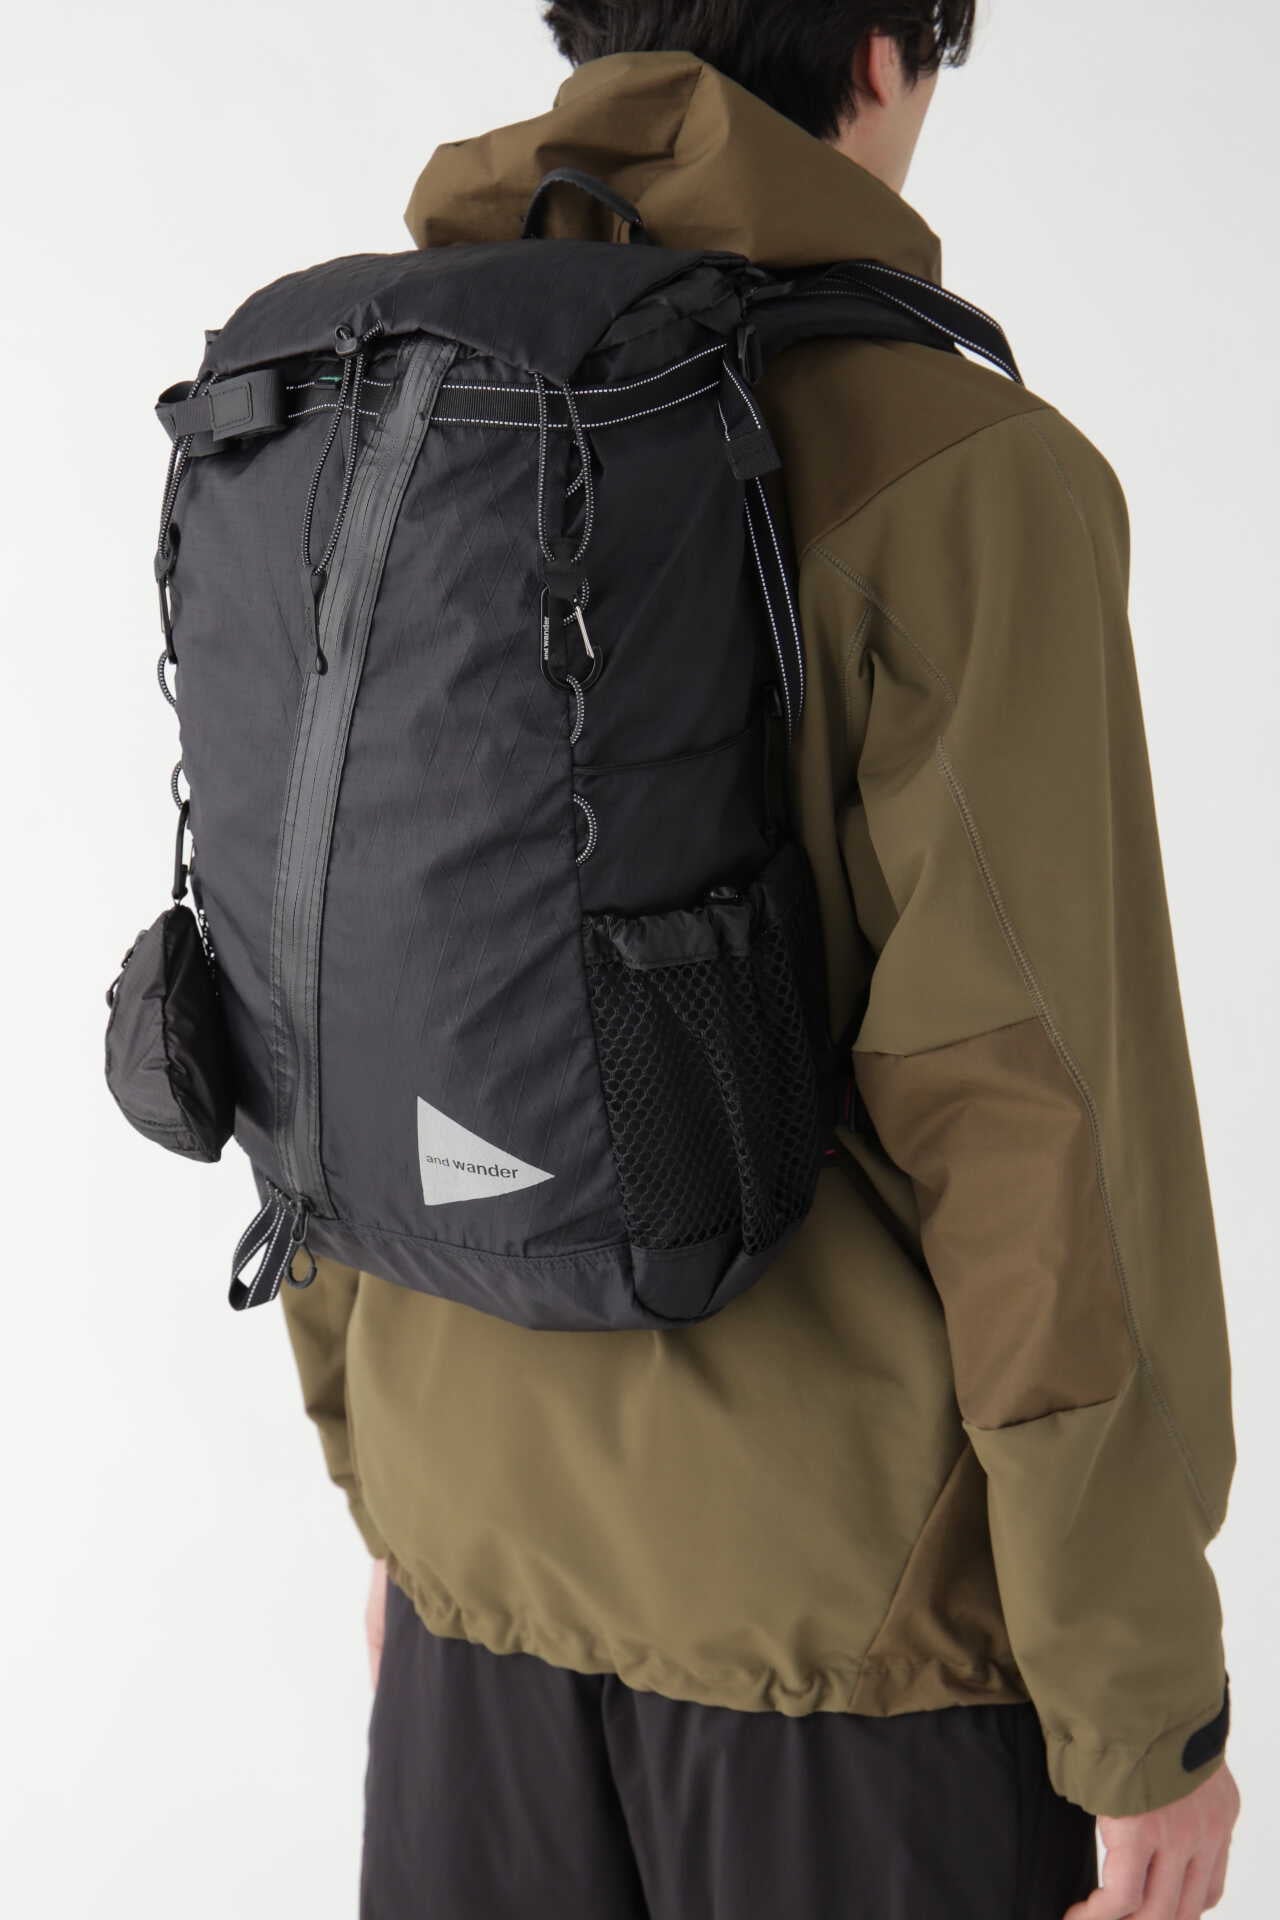 andwander X-Pac 30L backpack他は綺麗な状態だと思います